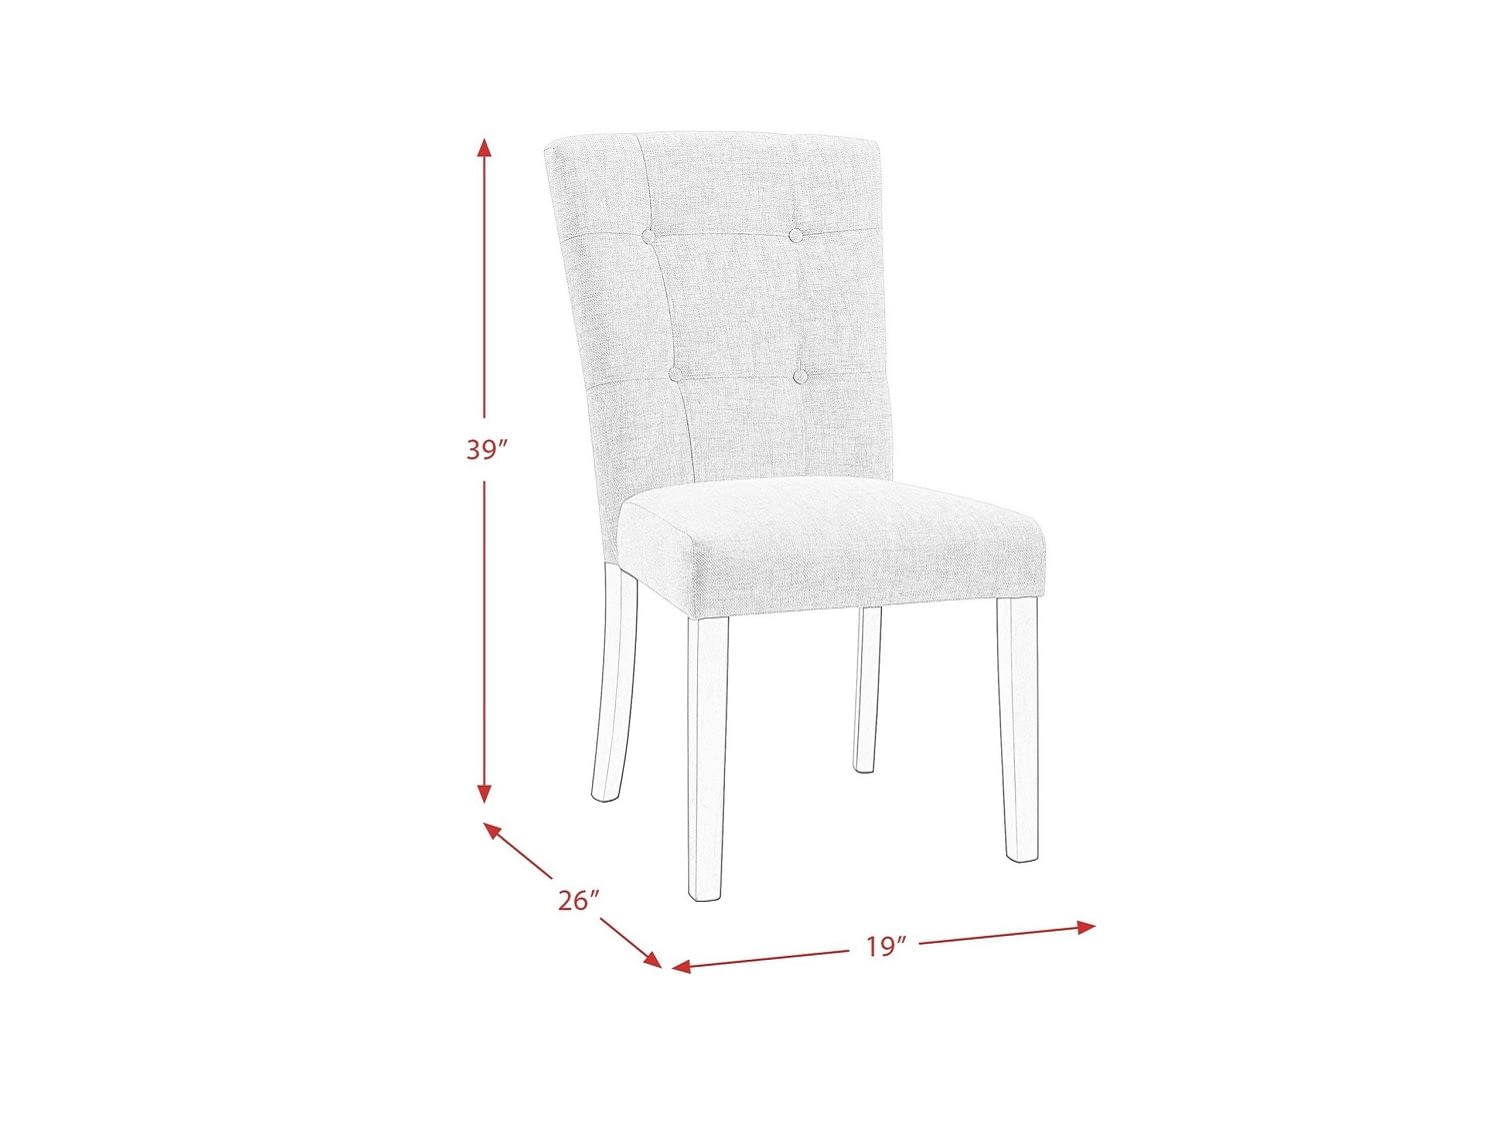 EPPINGTON Dining Chair - Dimensions